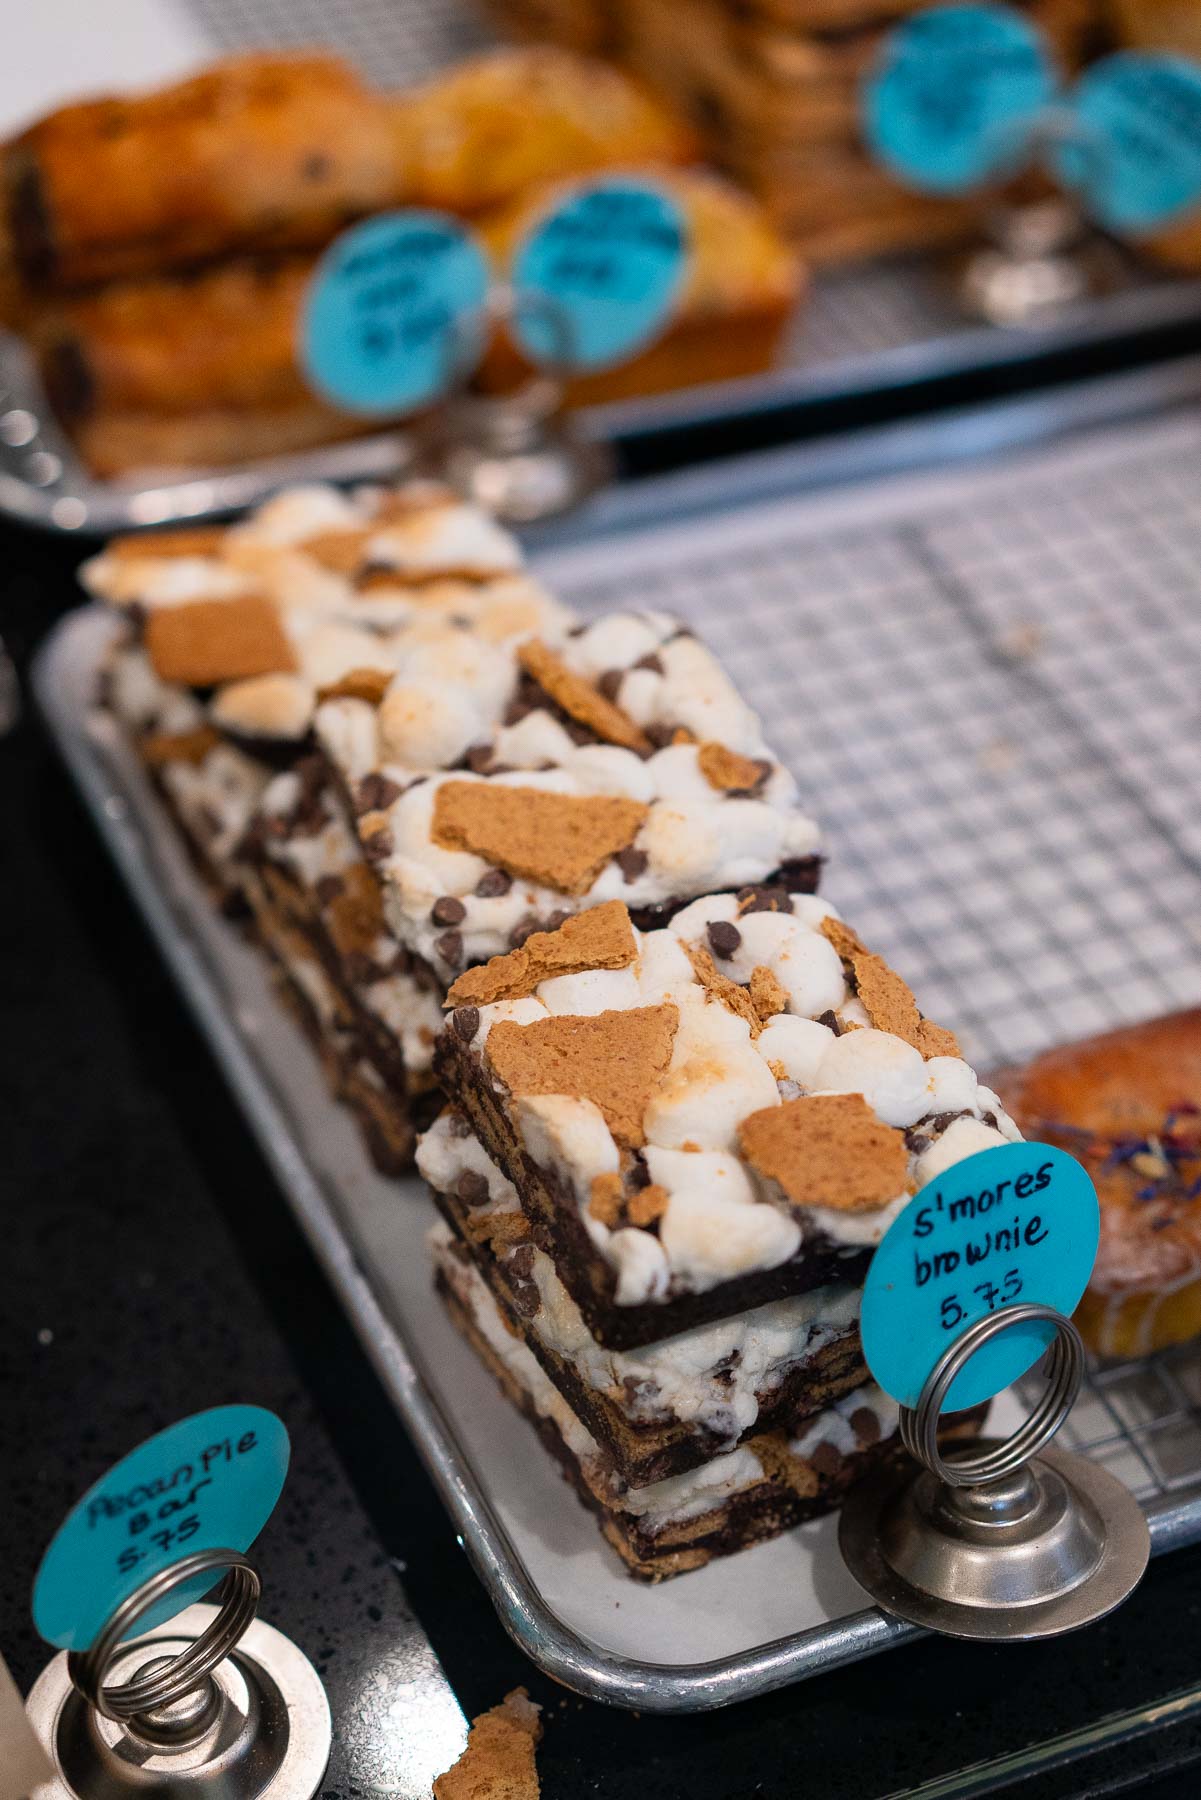 S'mores Brownie from Ceremonia Bake shop